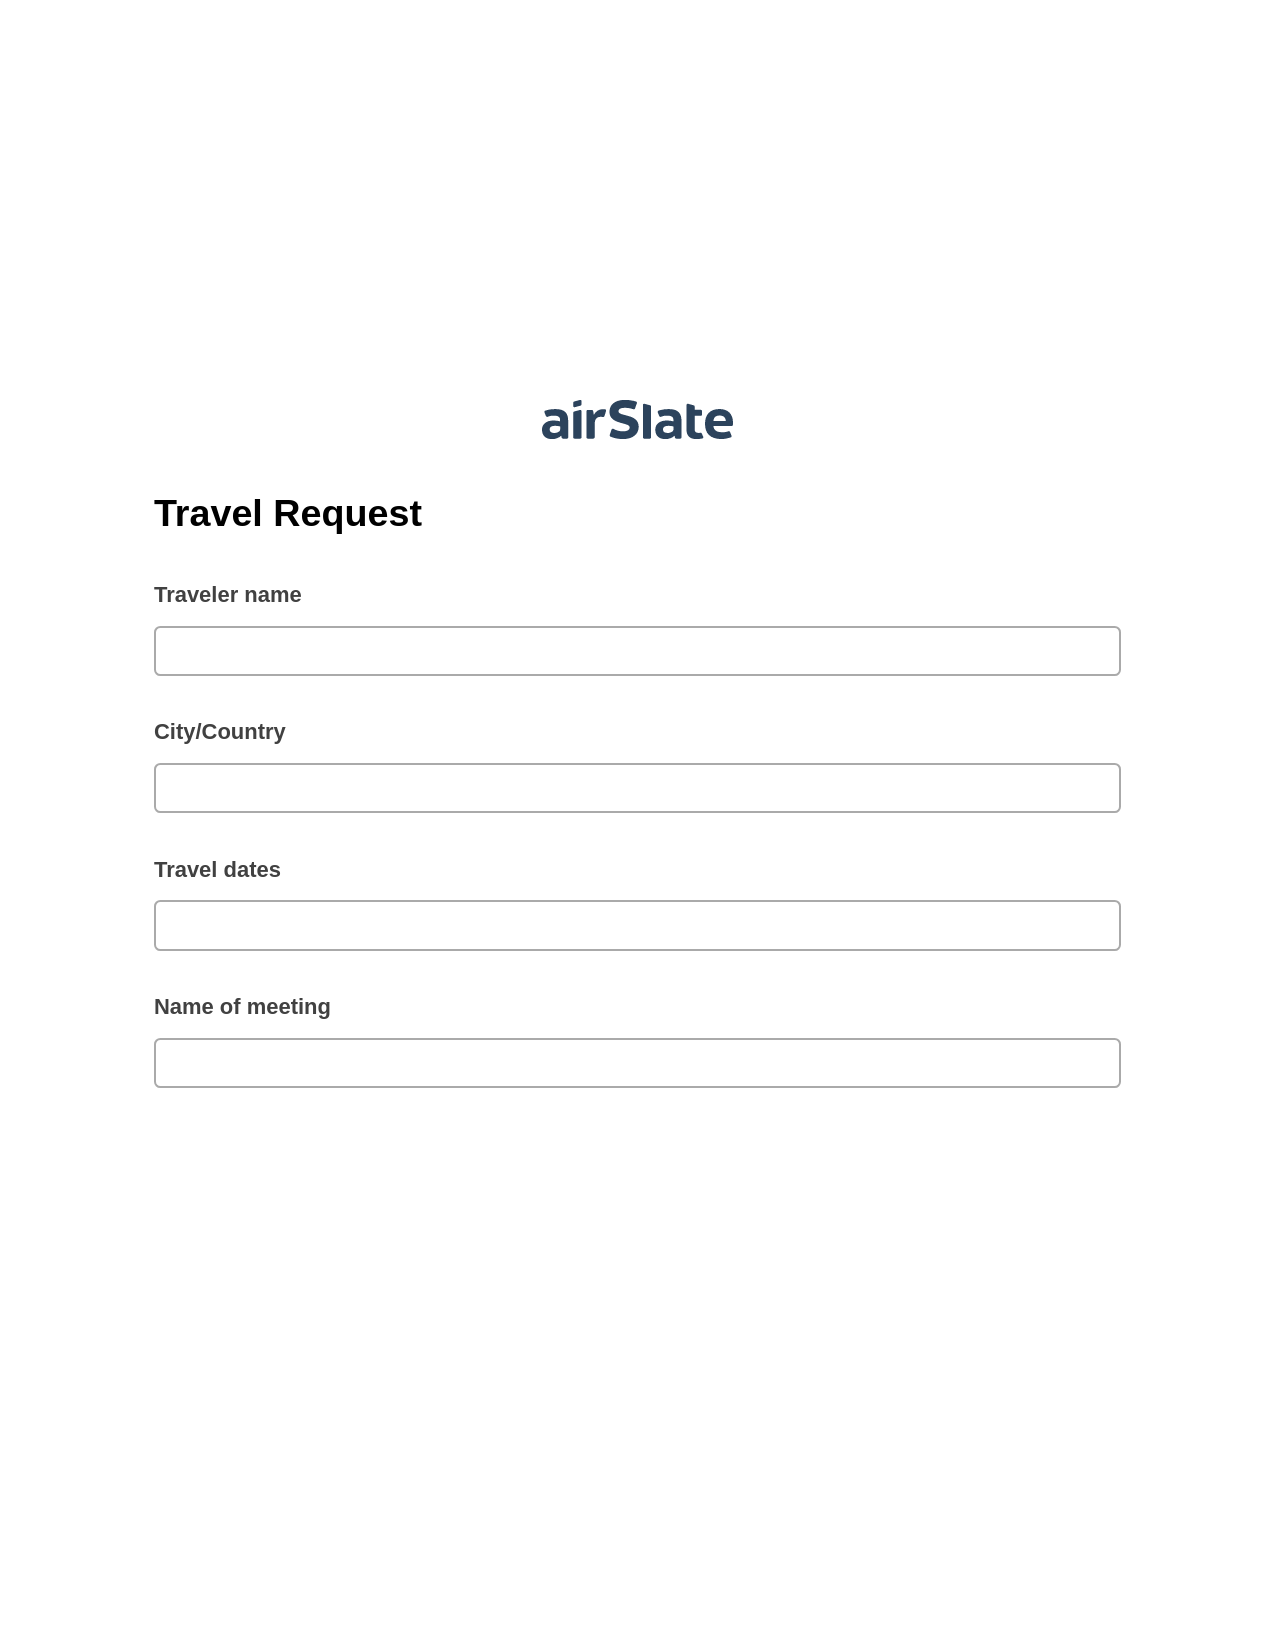 Travel Request Pre-fill Slate from MS Dynamics 365 Records Bot, Roles Reminder Bot, Dropbox Bot